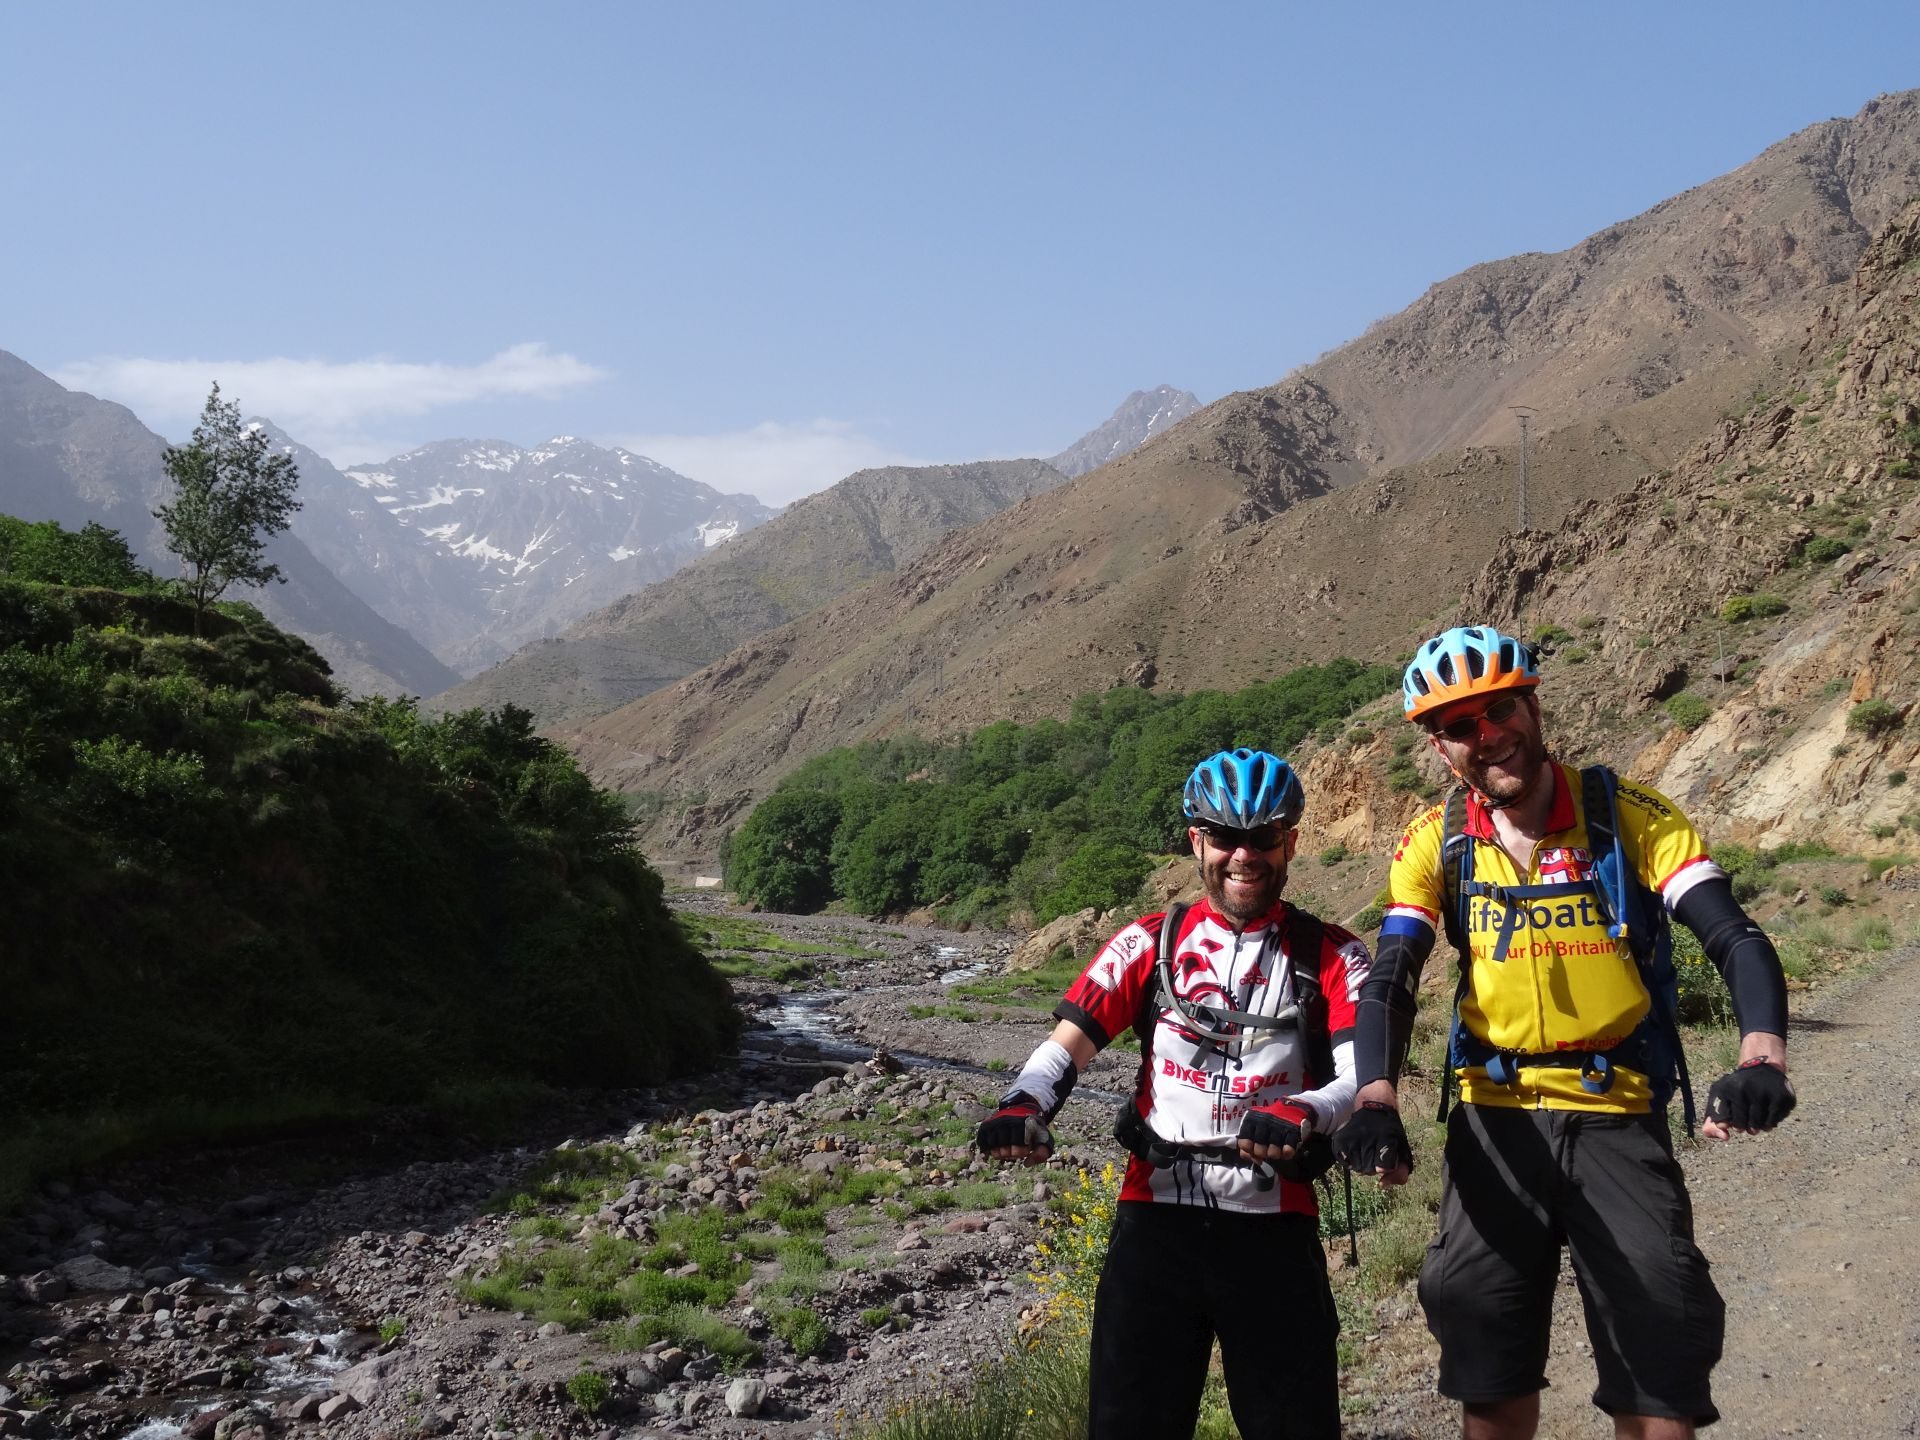 Day 9 - It`s been a long two weeks on the road! We`re on our bikes, right? Right? ;) "Riding" beside the Oued Rheraya river, on the way back to Marrakesh. The mountain on the left is the highest peak in North Africa, Jbel Toubkal (13,671 ft). Crikey. © Steve Woodward